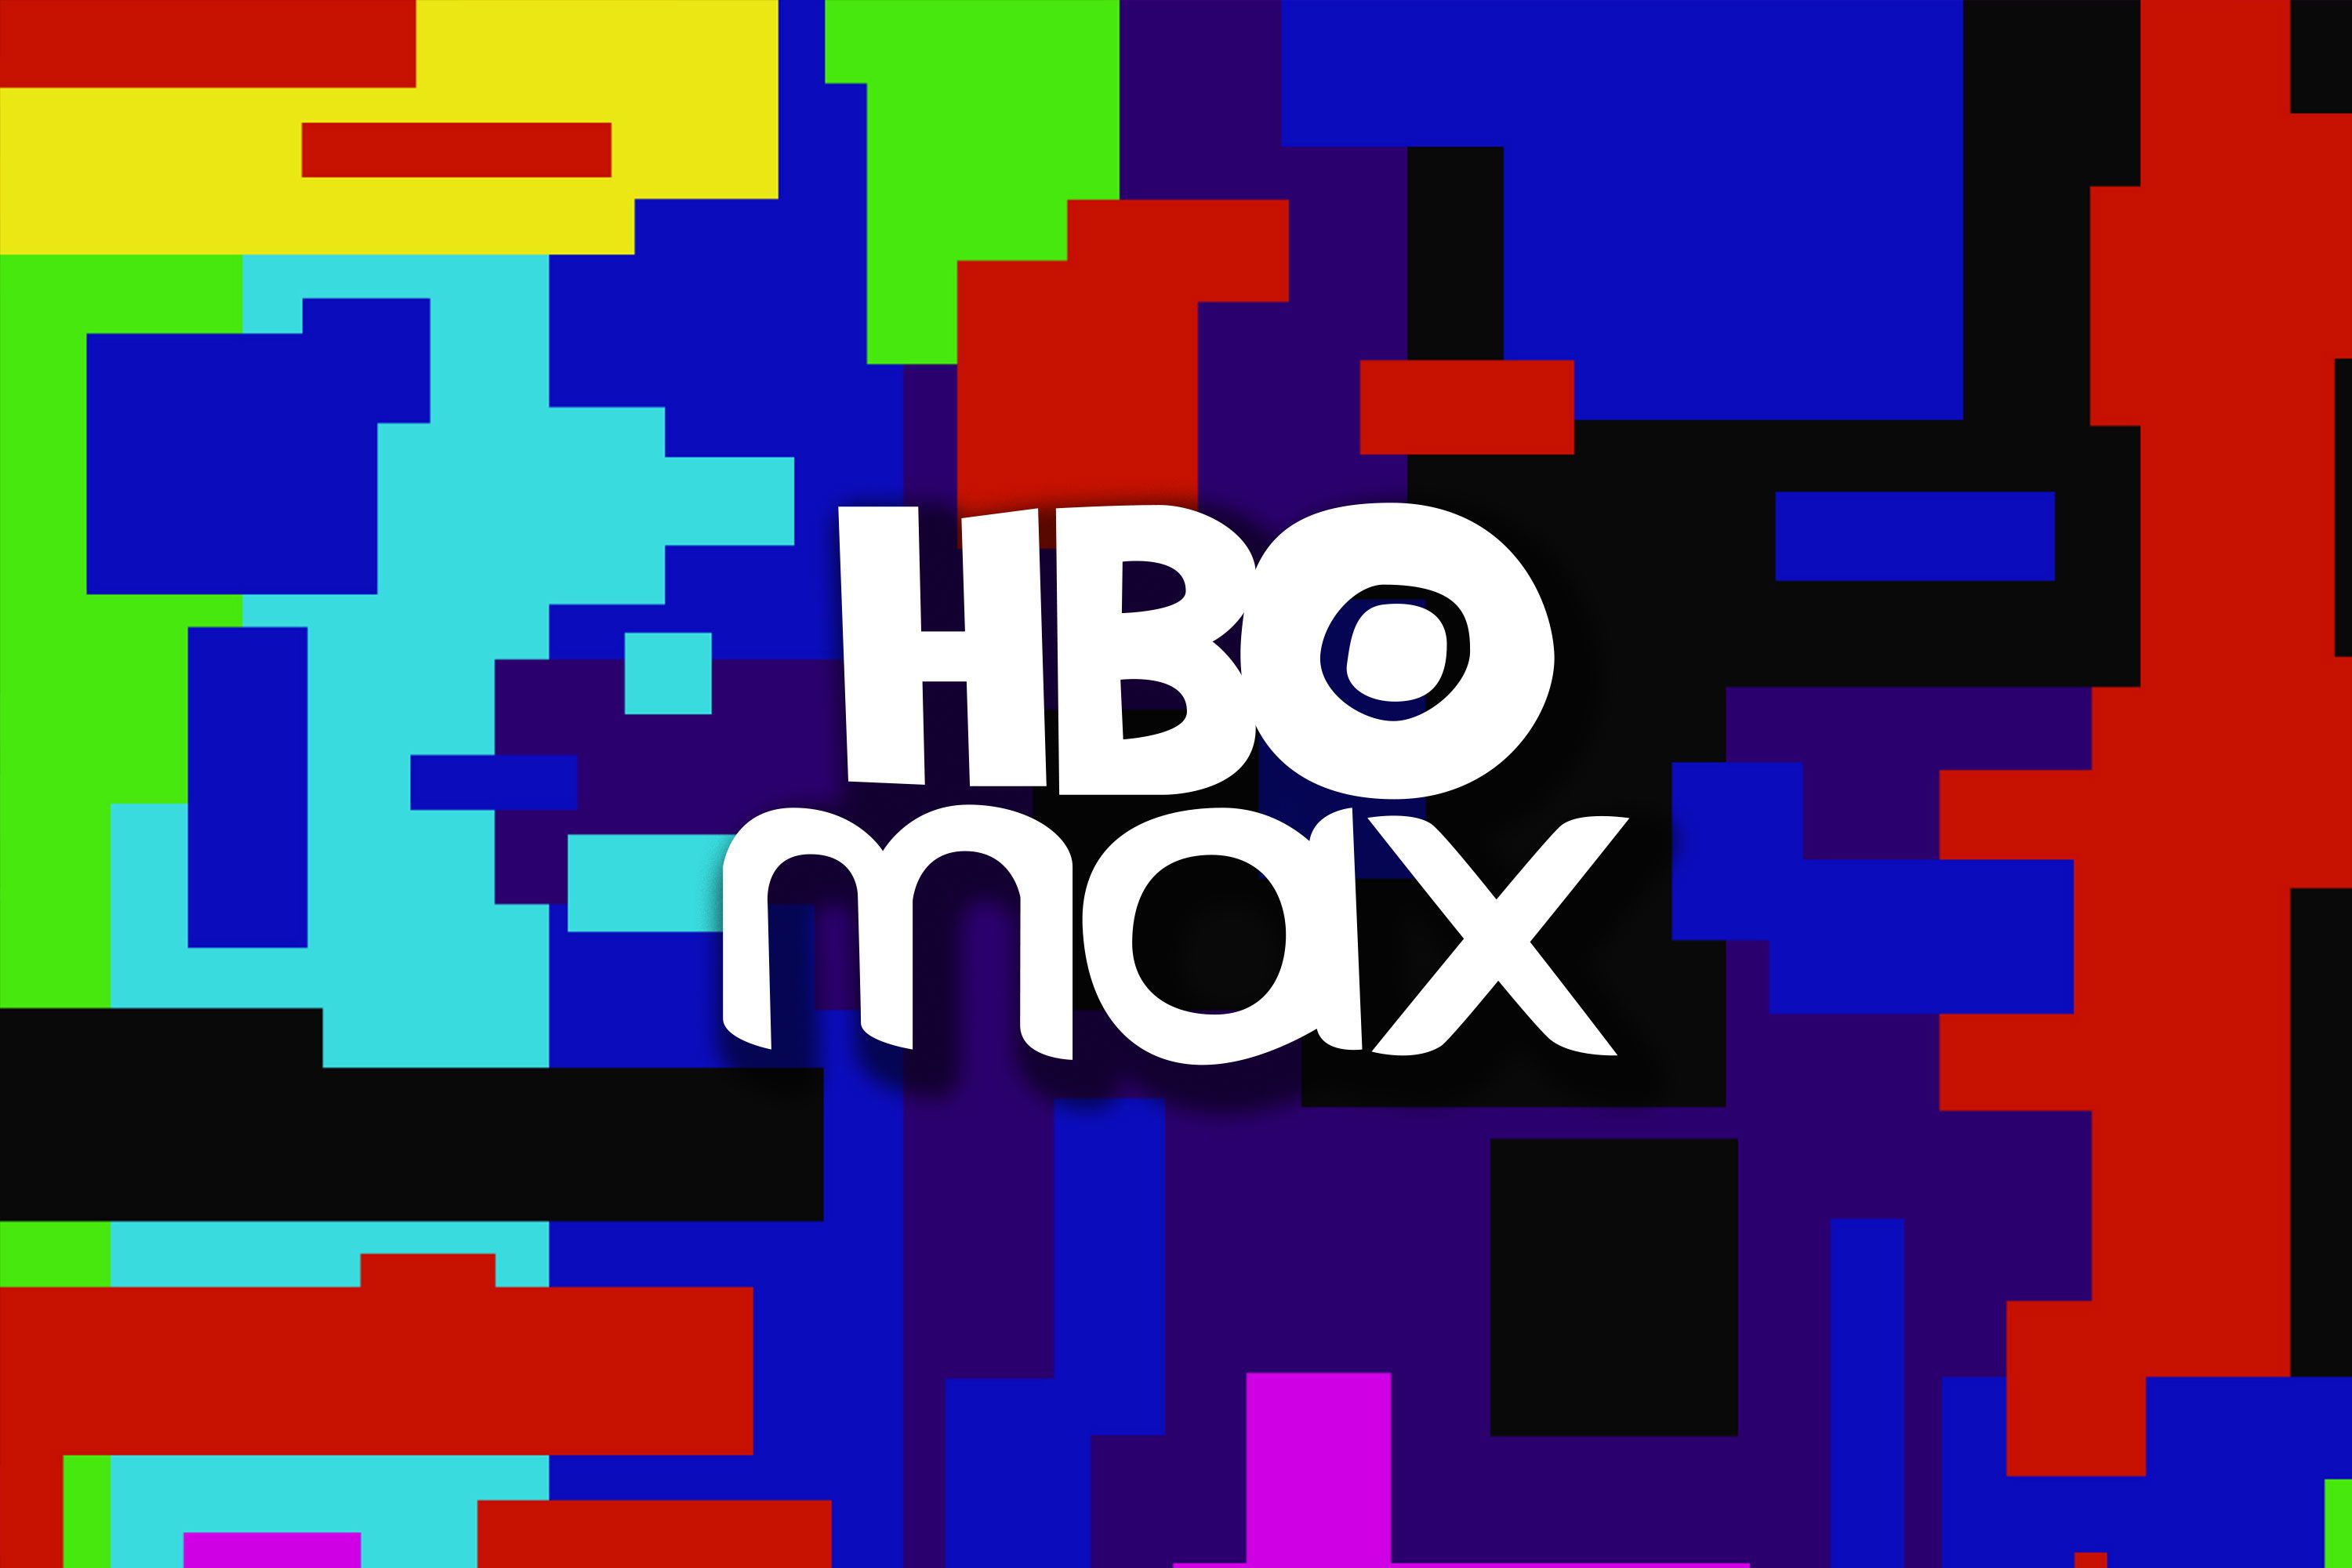 HBO Max Cost  Together Price US